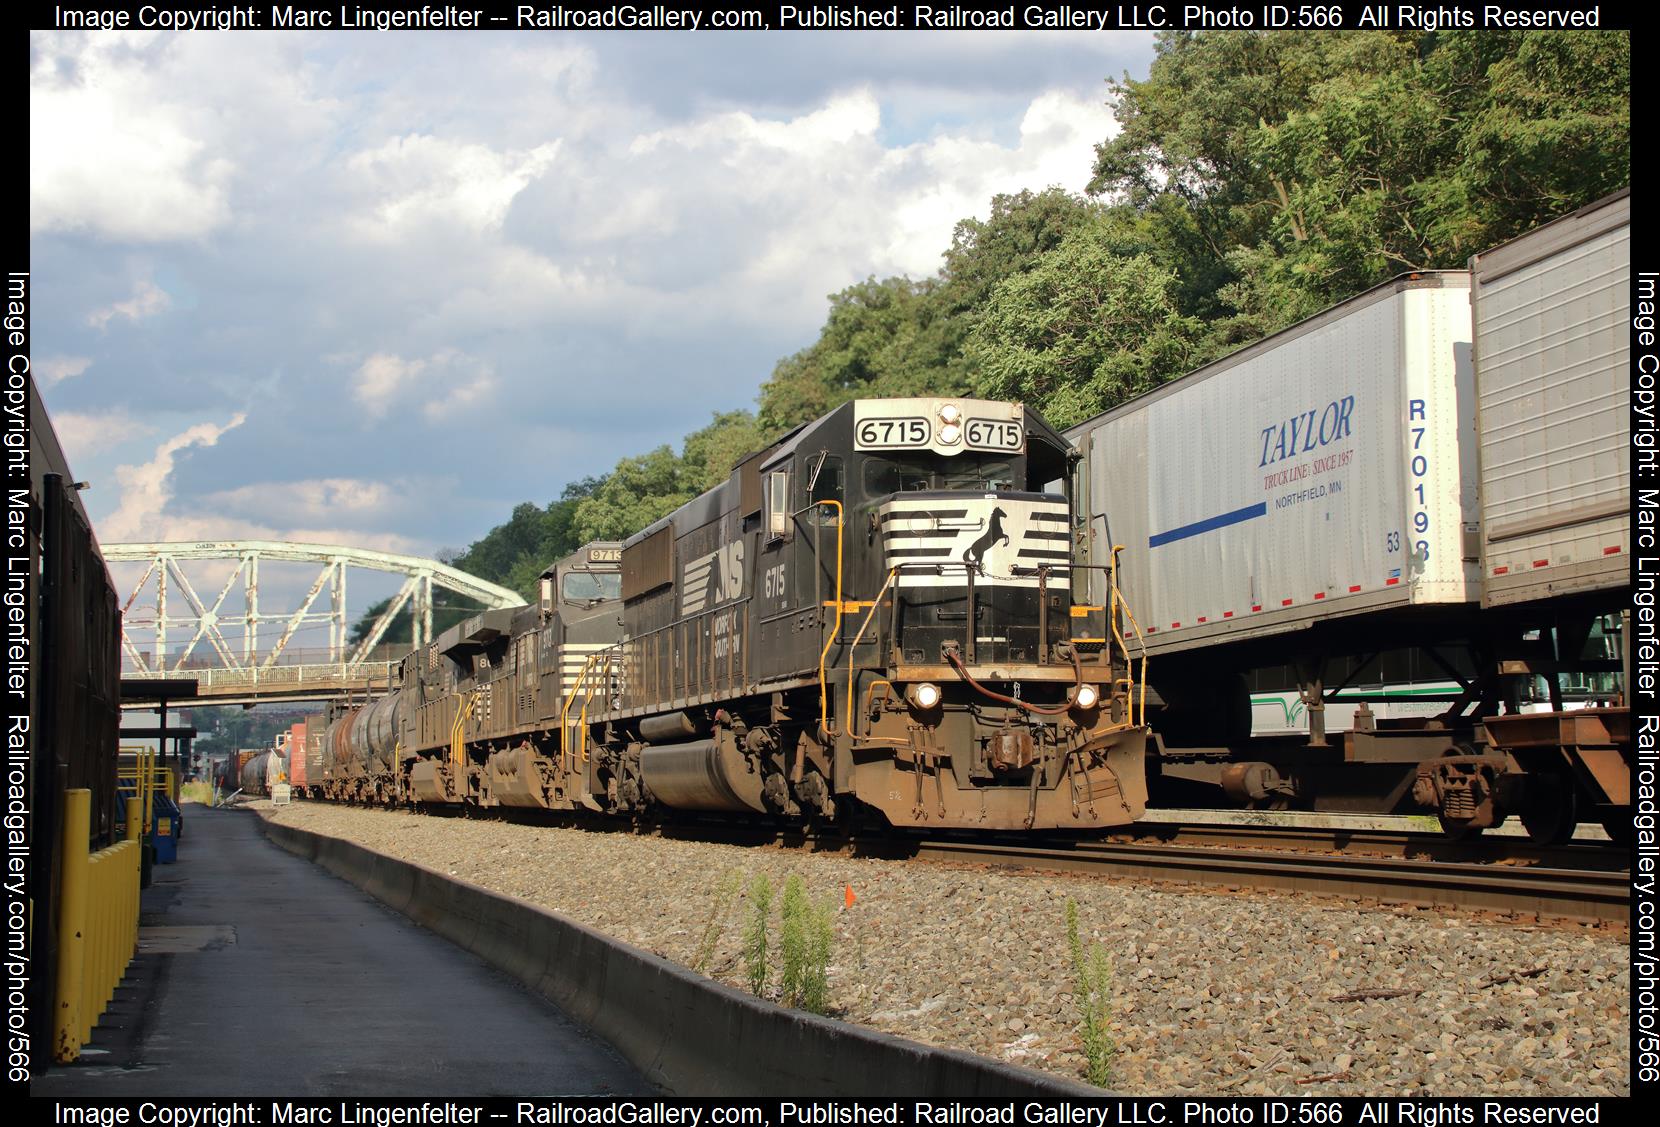 NS 6715 is a class EMD SD60 and  is pictured in Pittsburgh PA, Pennsylvania, USA.  This was taken along the NS Pittsburgh Line on the Norfolk Southern. Photo Copyright: Marc Lingenfelter uploaded to Railroad Gallery on 01/12/2023. This photograph of NS 6715 was taken on Friday, September 21, 2018. All Rights Reserved. 